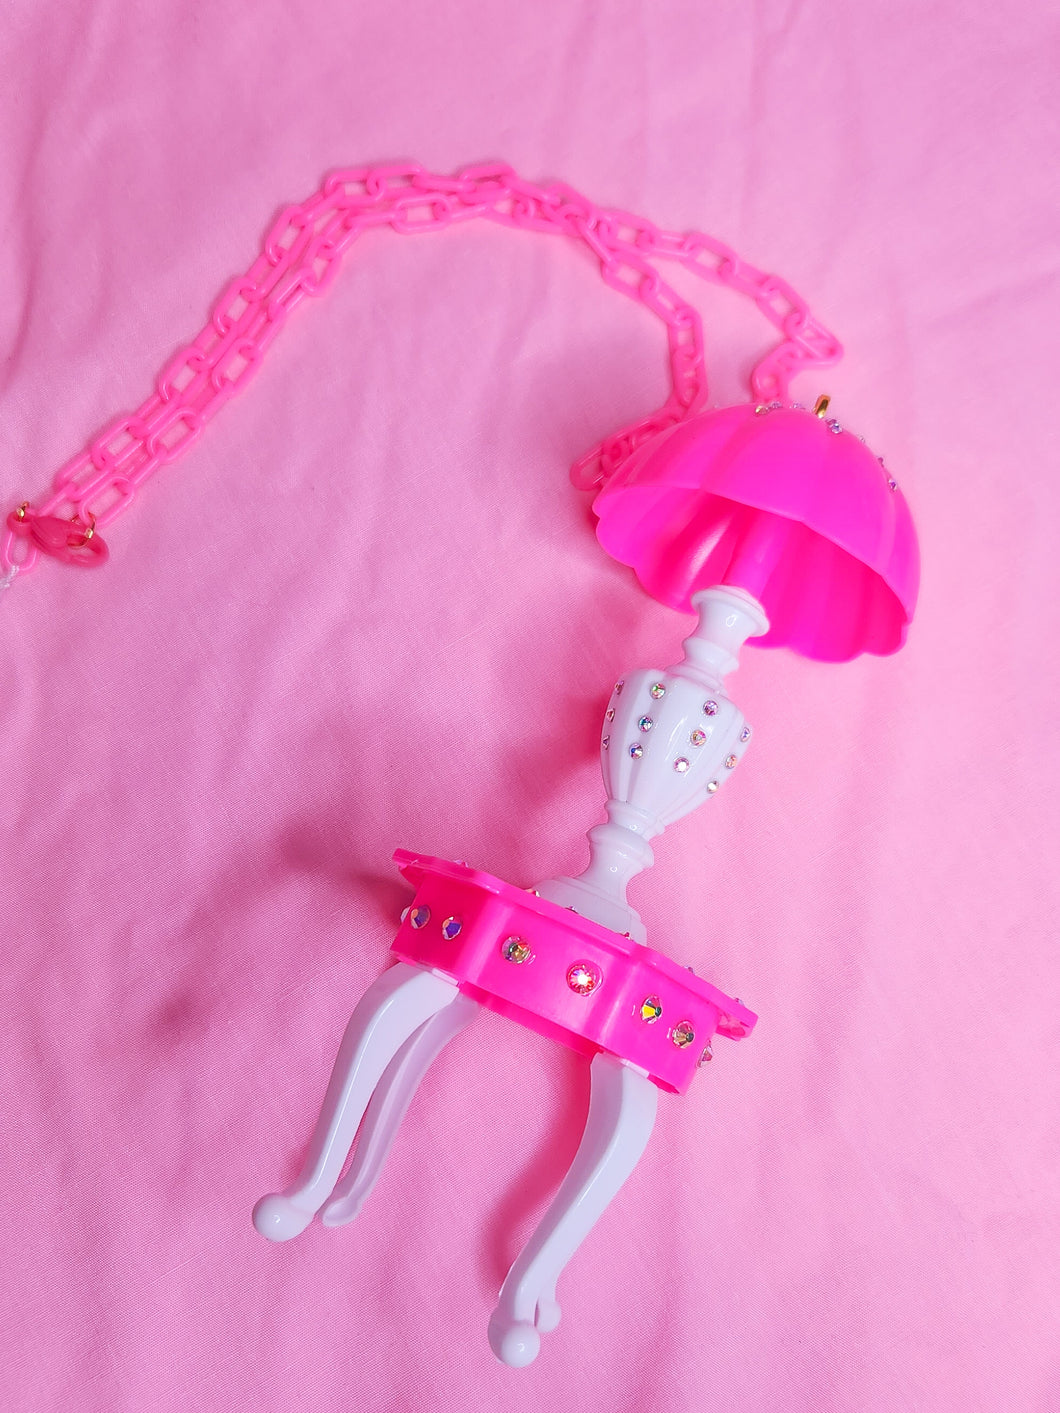 Hot pink table lamp dollhouse chunky bling maximalist necklace